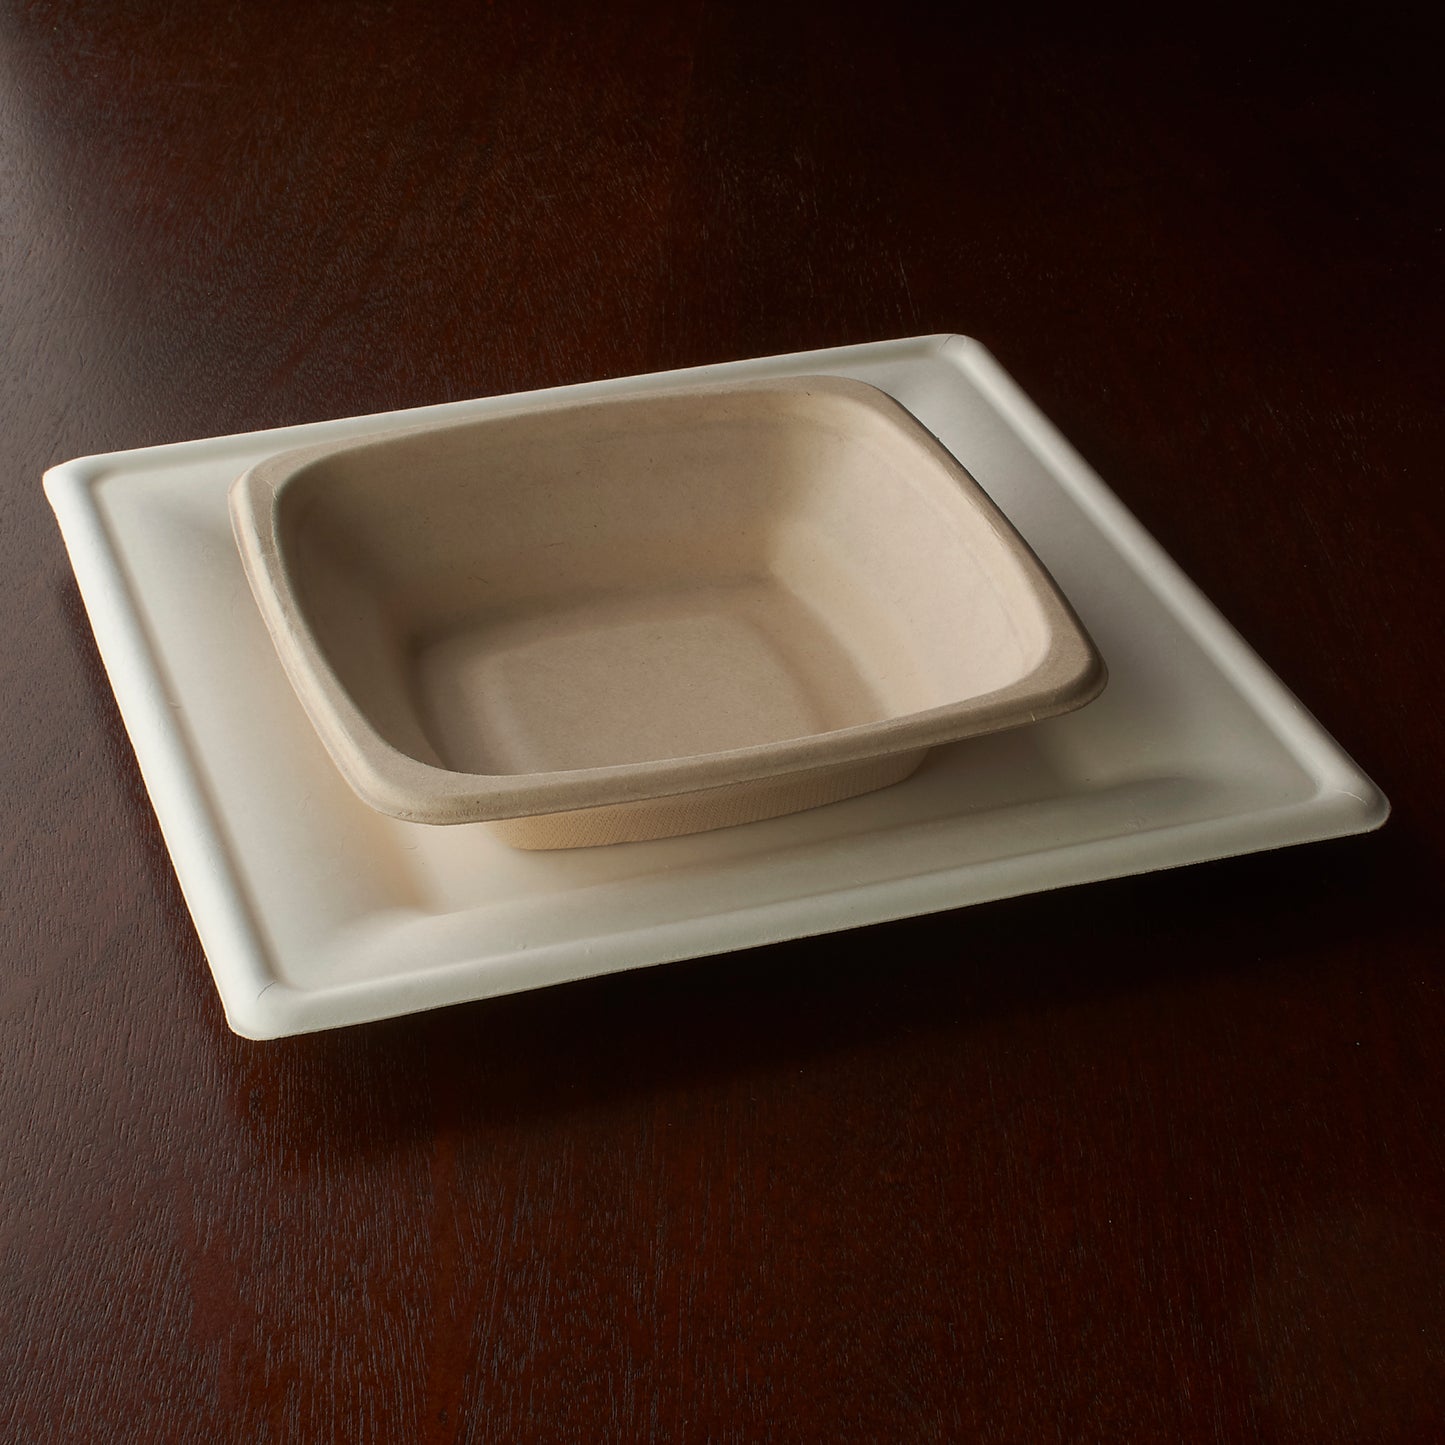 100 pc. Microwavable, Biodegradable Beige Square Soup Bowls: Sturdy, Eco-Friendly and Disposable